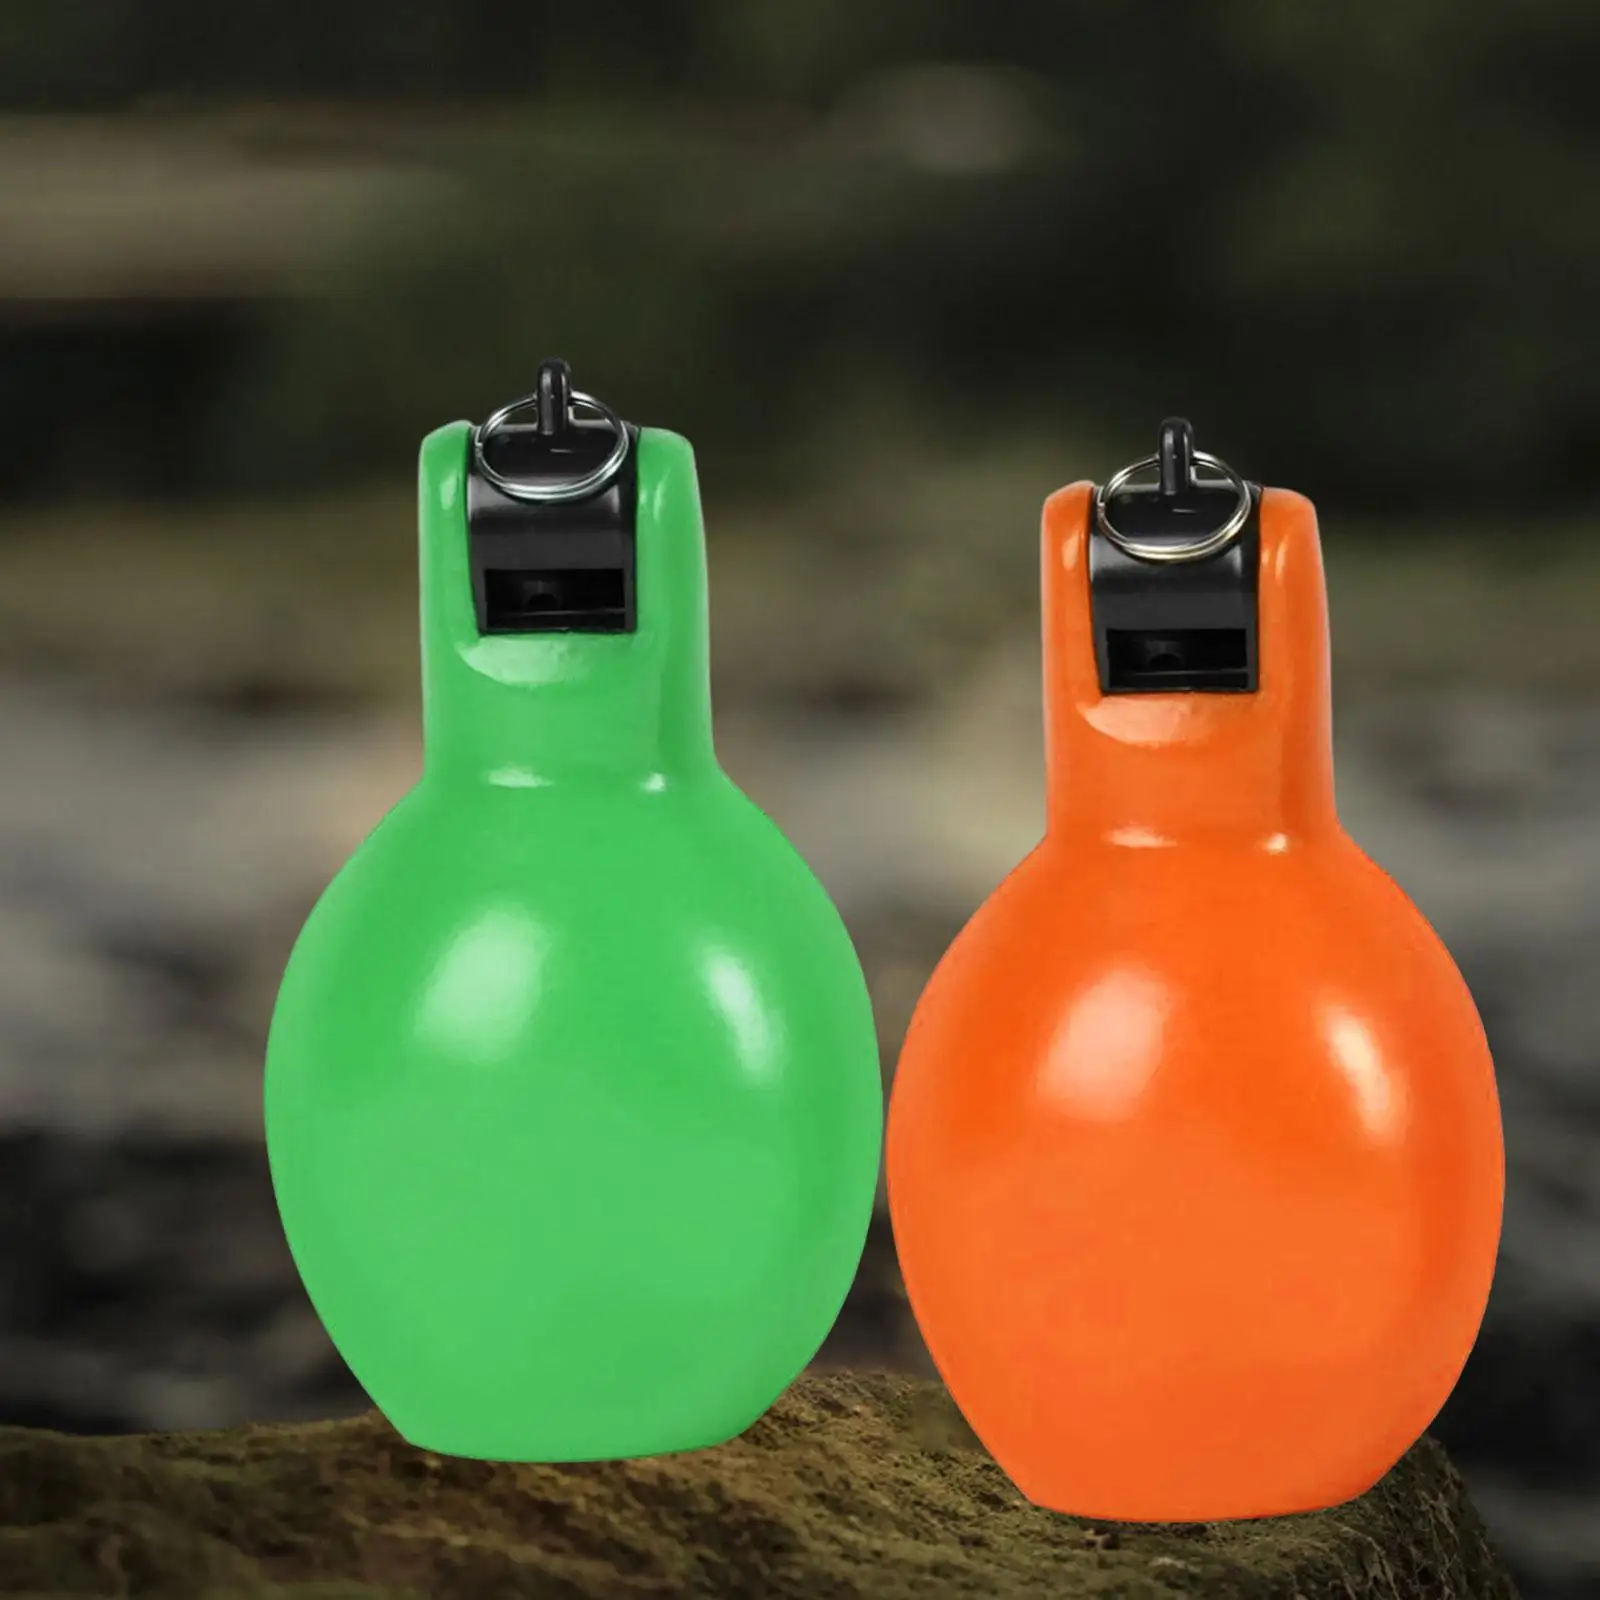 2x Hand Squeeze Whistles Sports Whistle Manual Loud Sound Coaches Whistle Trainer Whistle for Walking Survival Hiking Coaches